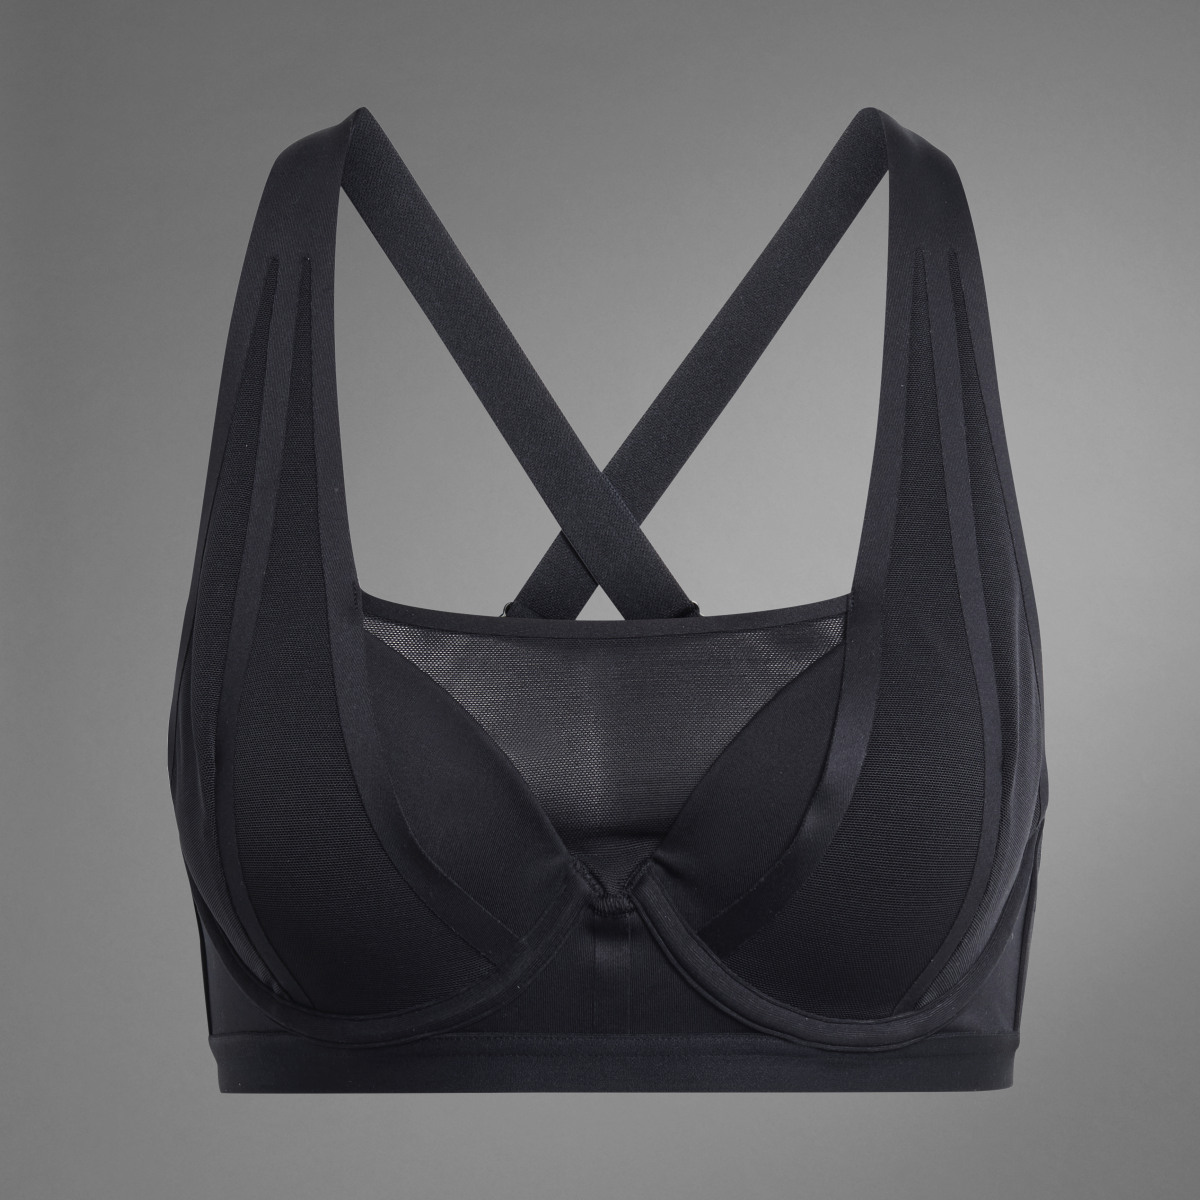 Adidas Brassière de training TLRD Impact Luxe Collective Power Maintien fort. 10